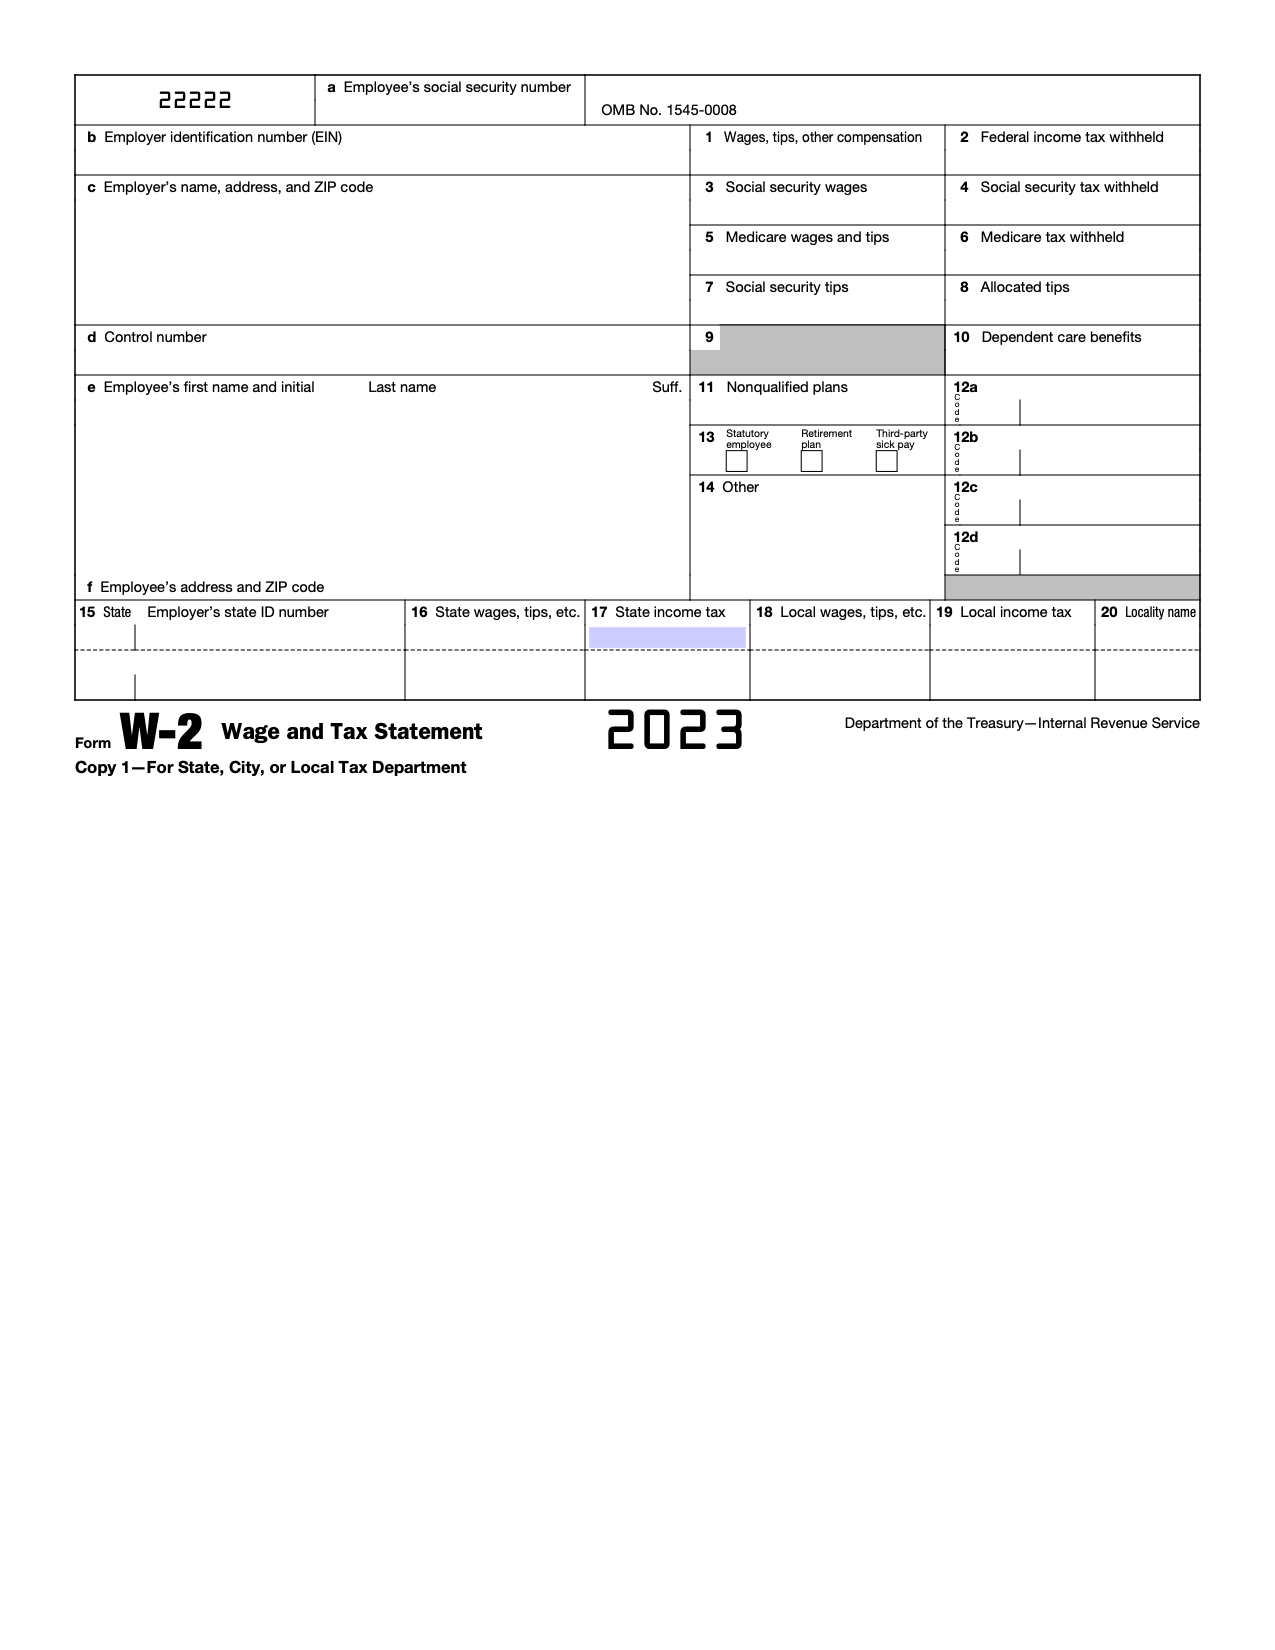 Free Irs Form W-2 | Wage And Tax Statement - Pdf – Eforms within Sample W2 Forms